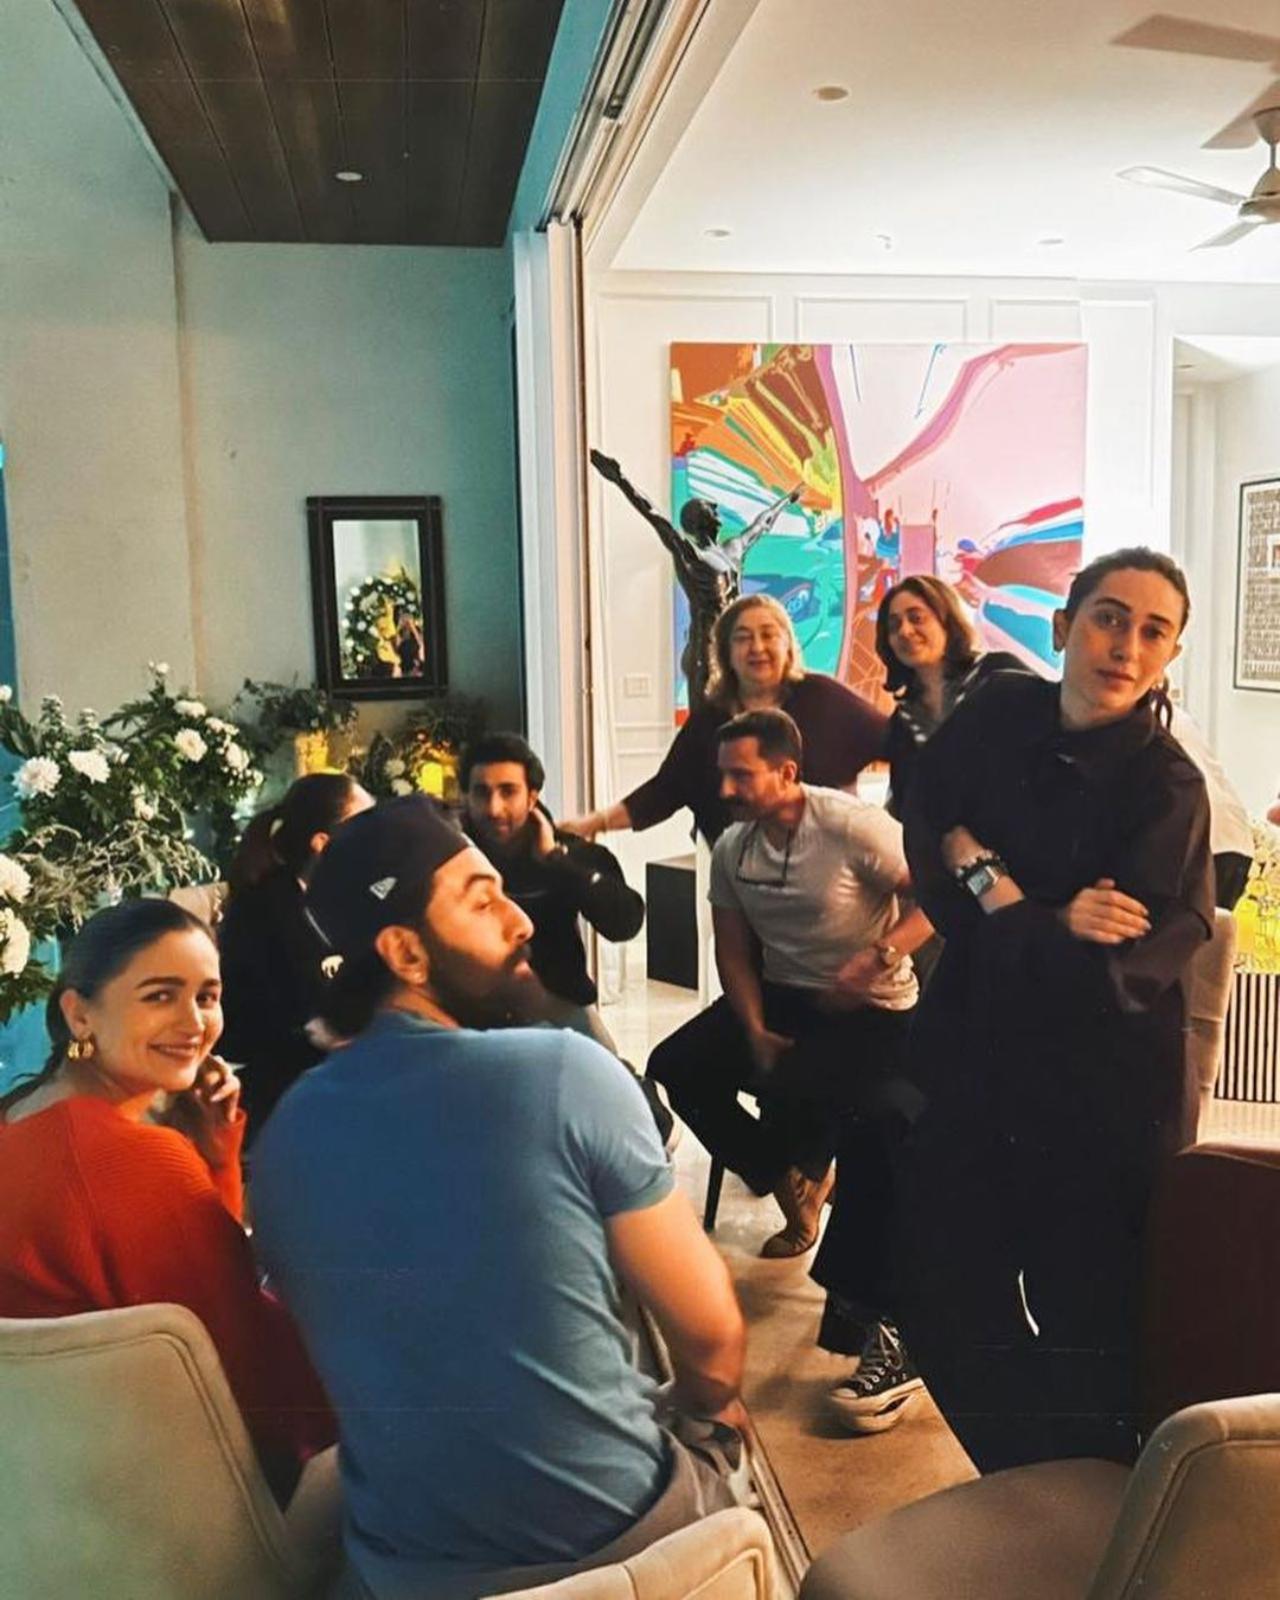 Karisma also shared a couple of blurry pictures where she along with Ranbir, Alia, Kareena, Saif, Armaan Jain are having a conversation and take a brief break from it to pose for the photograph